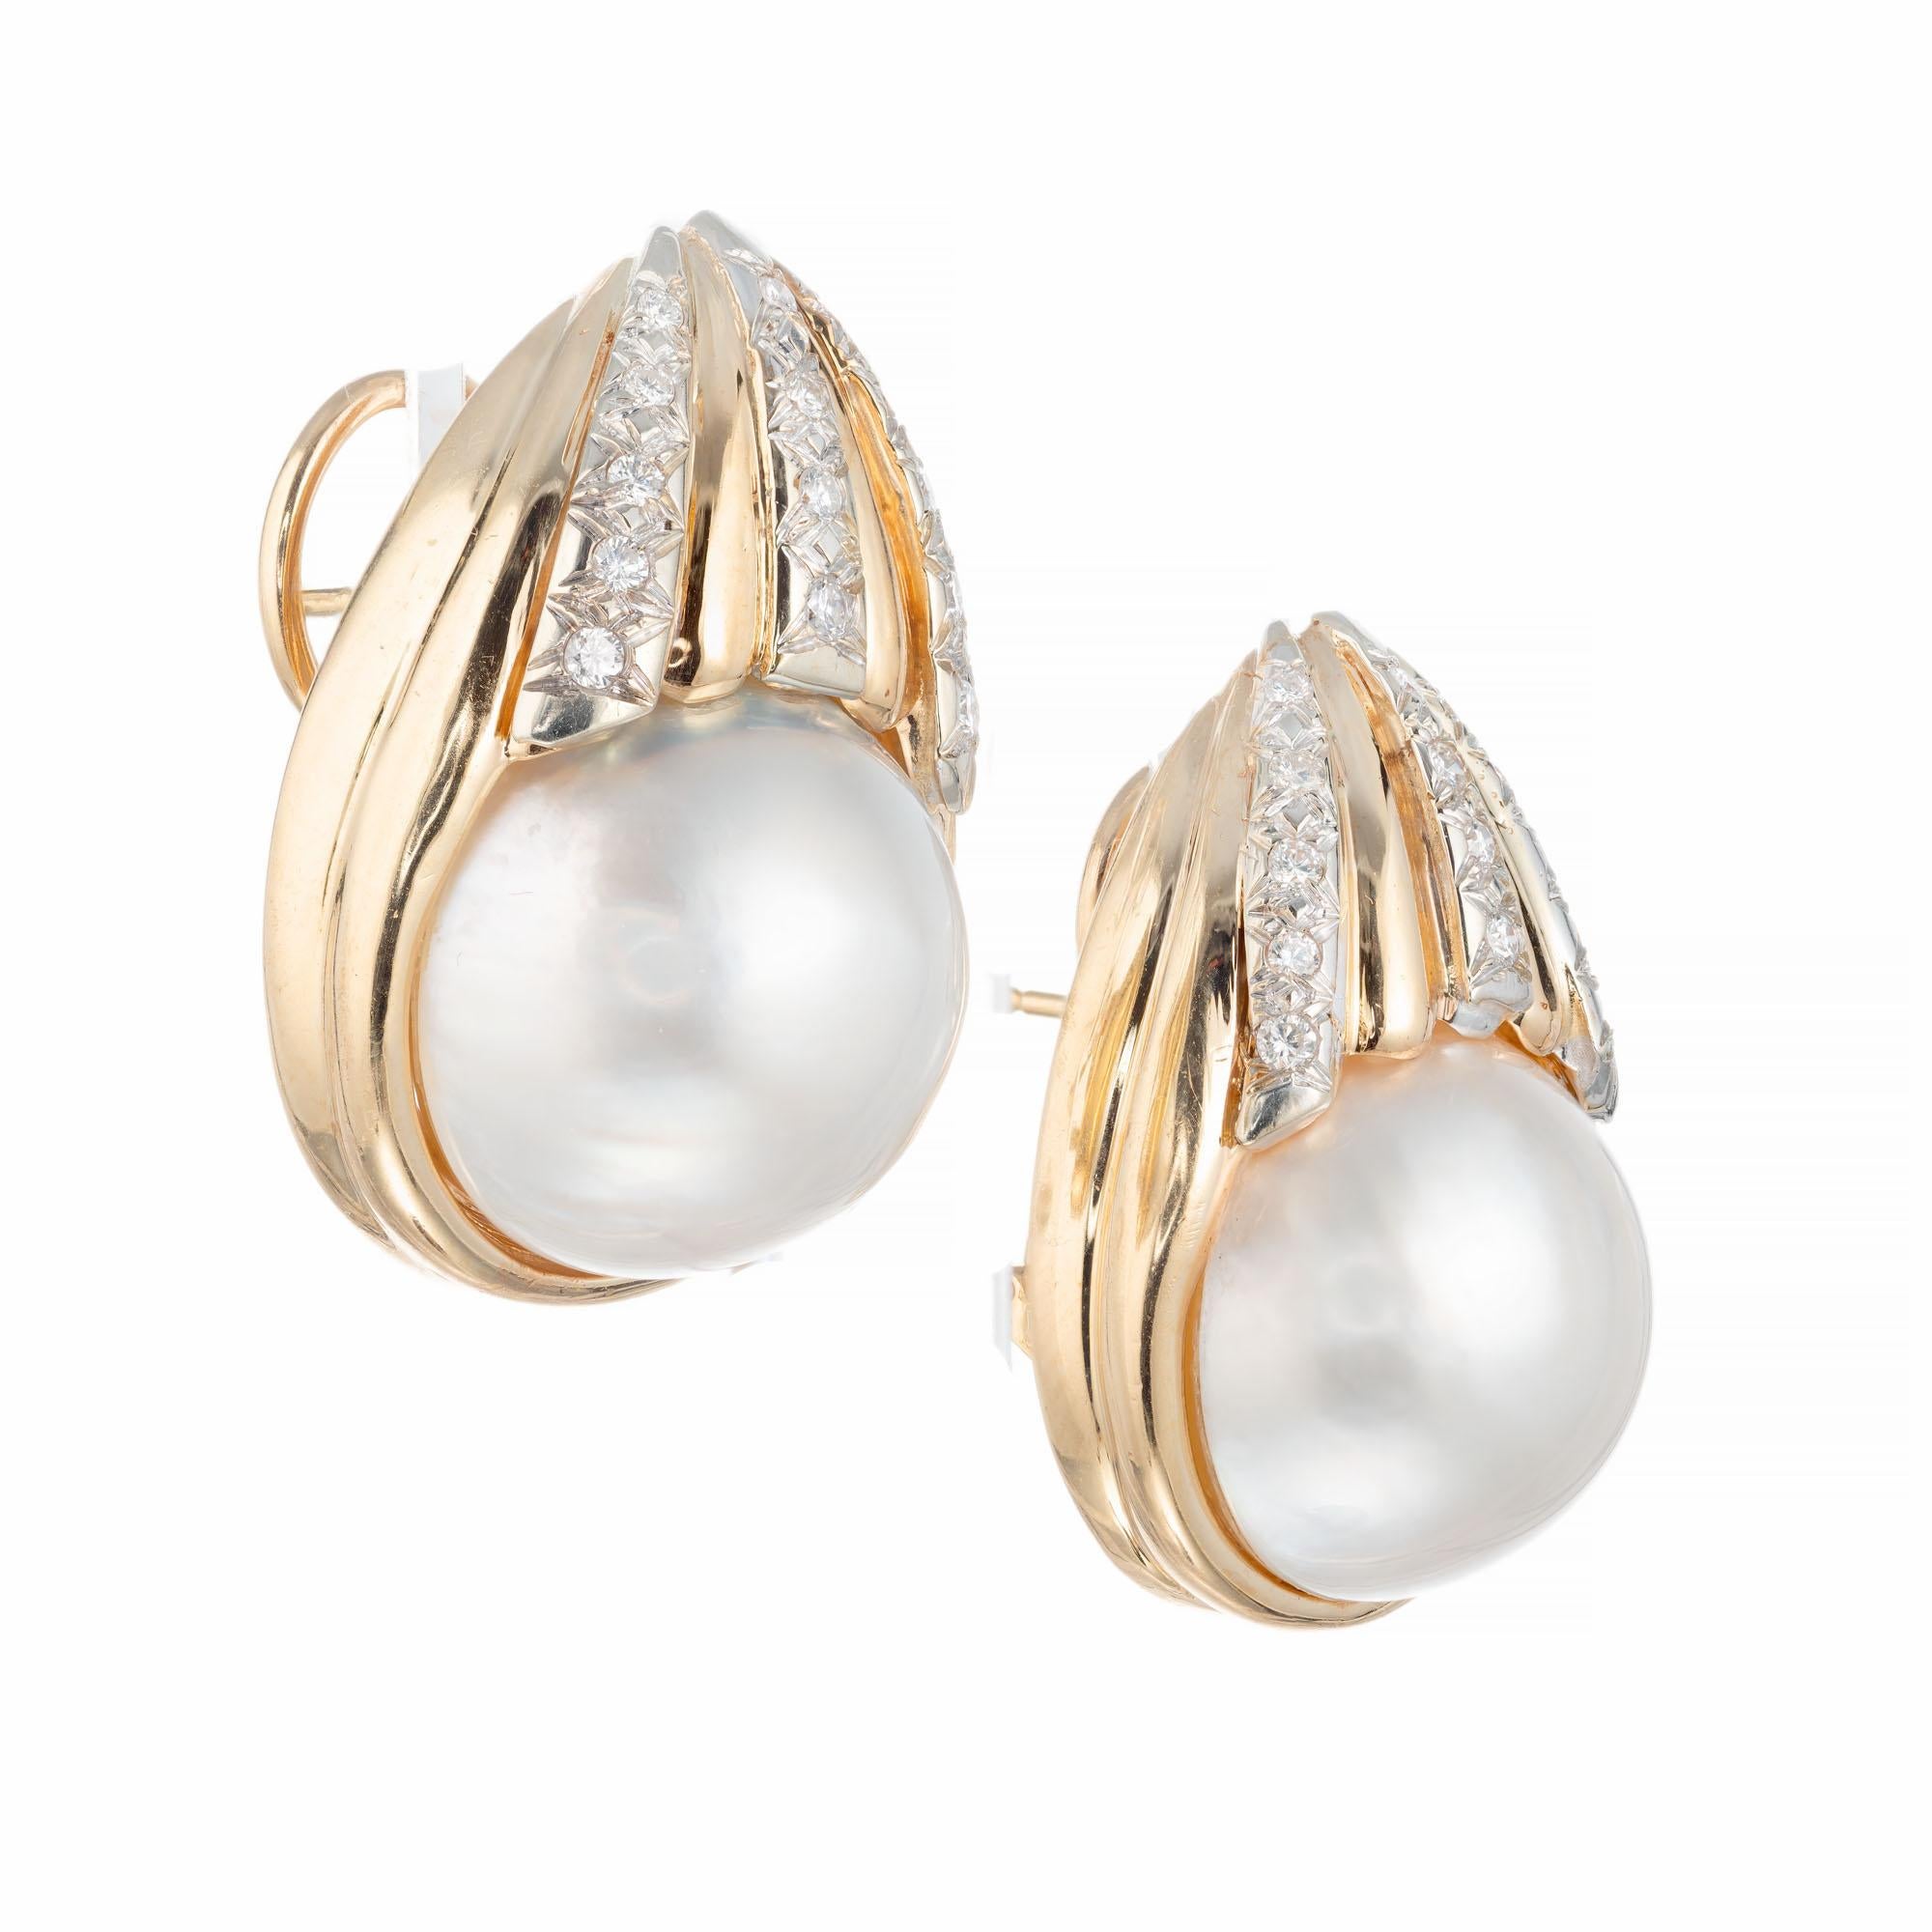 Mabe pearl and diamond earrings. 2 large cabochon set mabe pearls with 28 round accent diamonds in 14k yellow gold settings. 

2 mabe pearls approx. 17mm each. 
28 round diamonds, approx total weight: .20cts H, SI
Length: 1.16 inches or